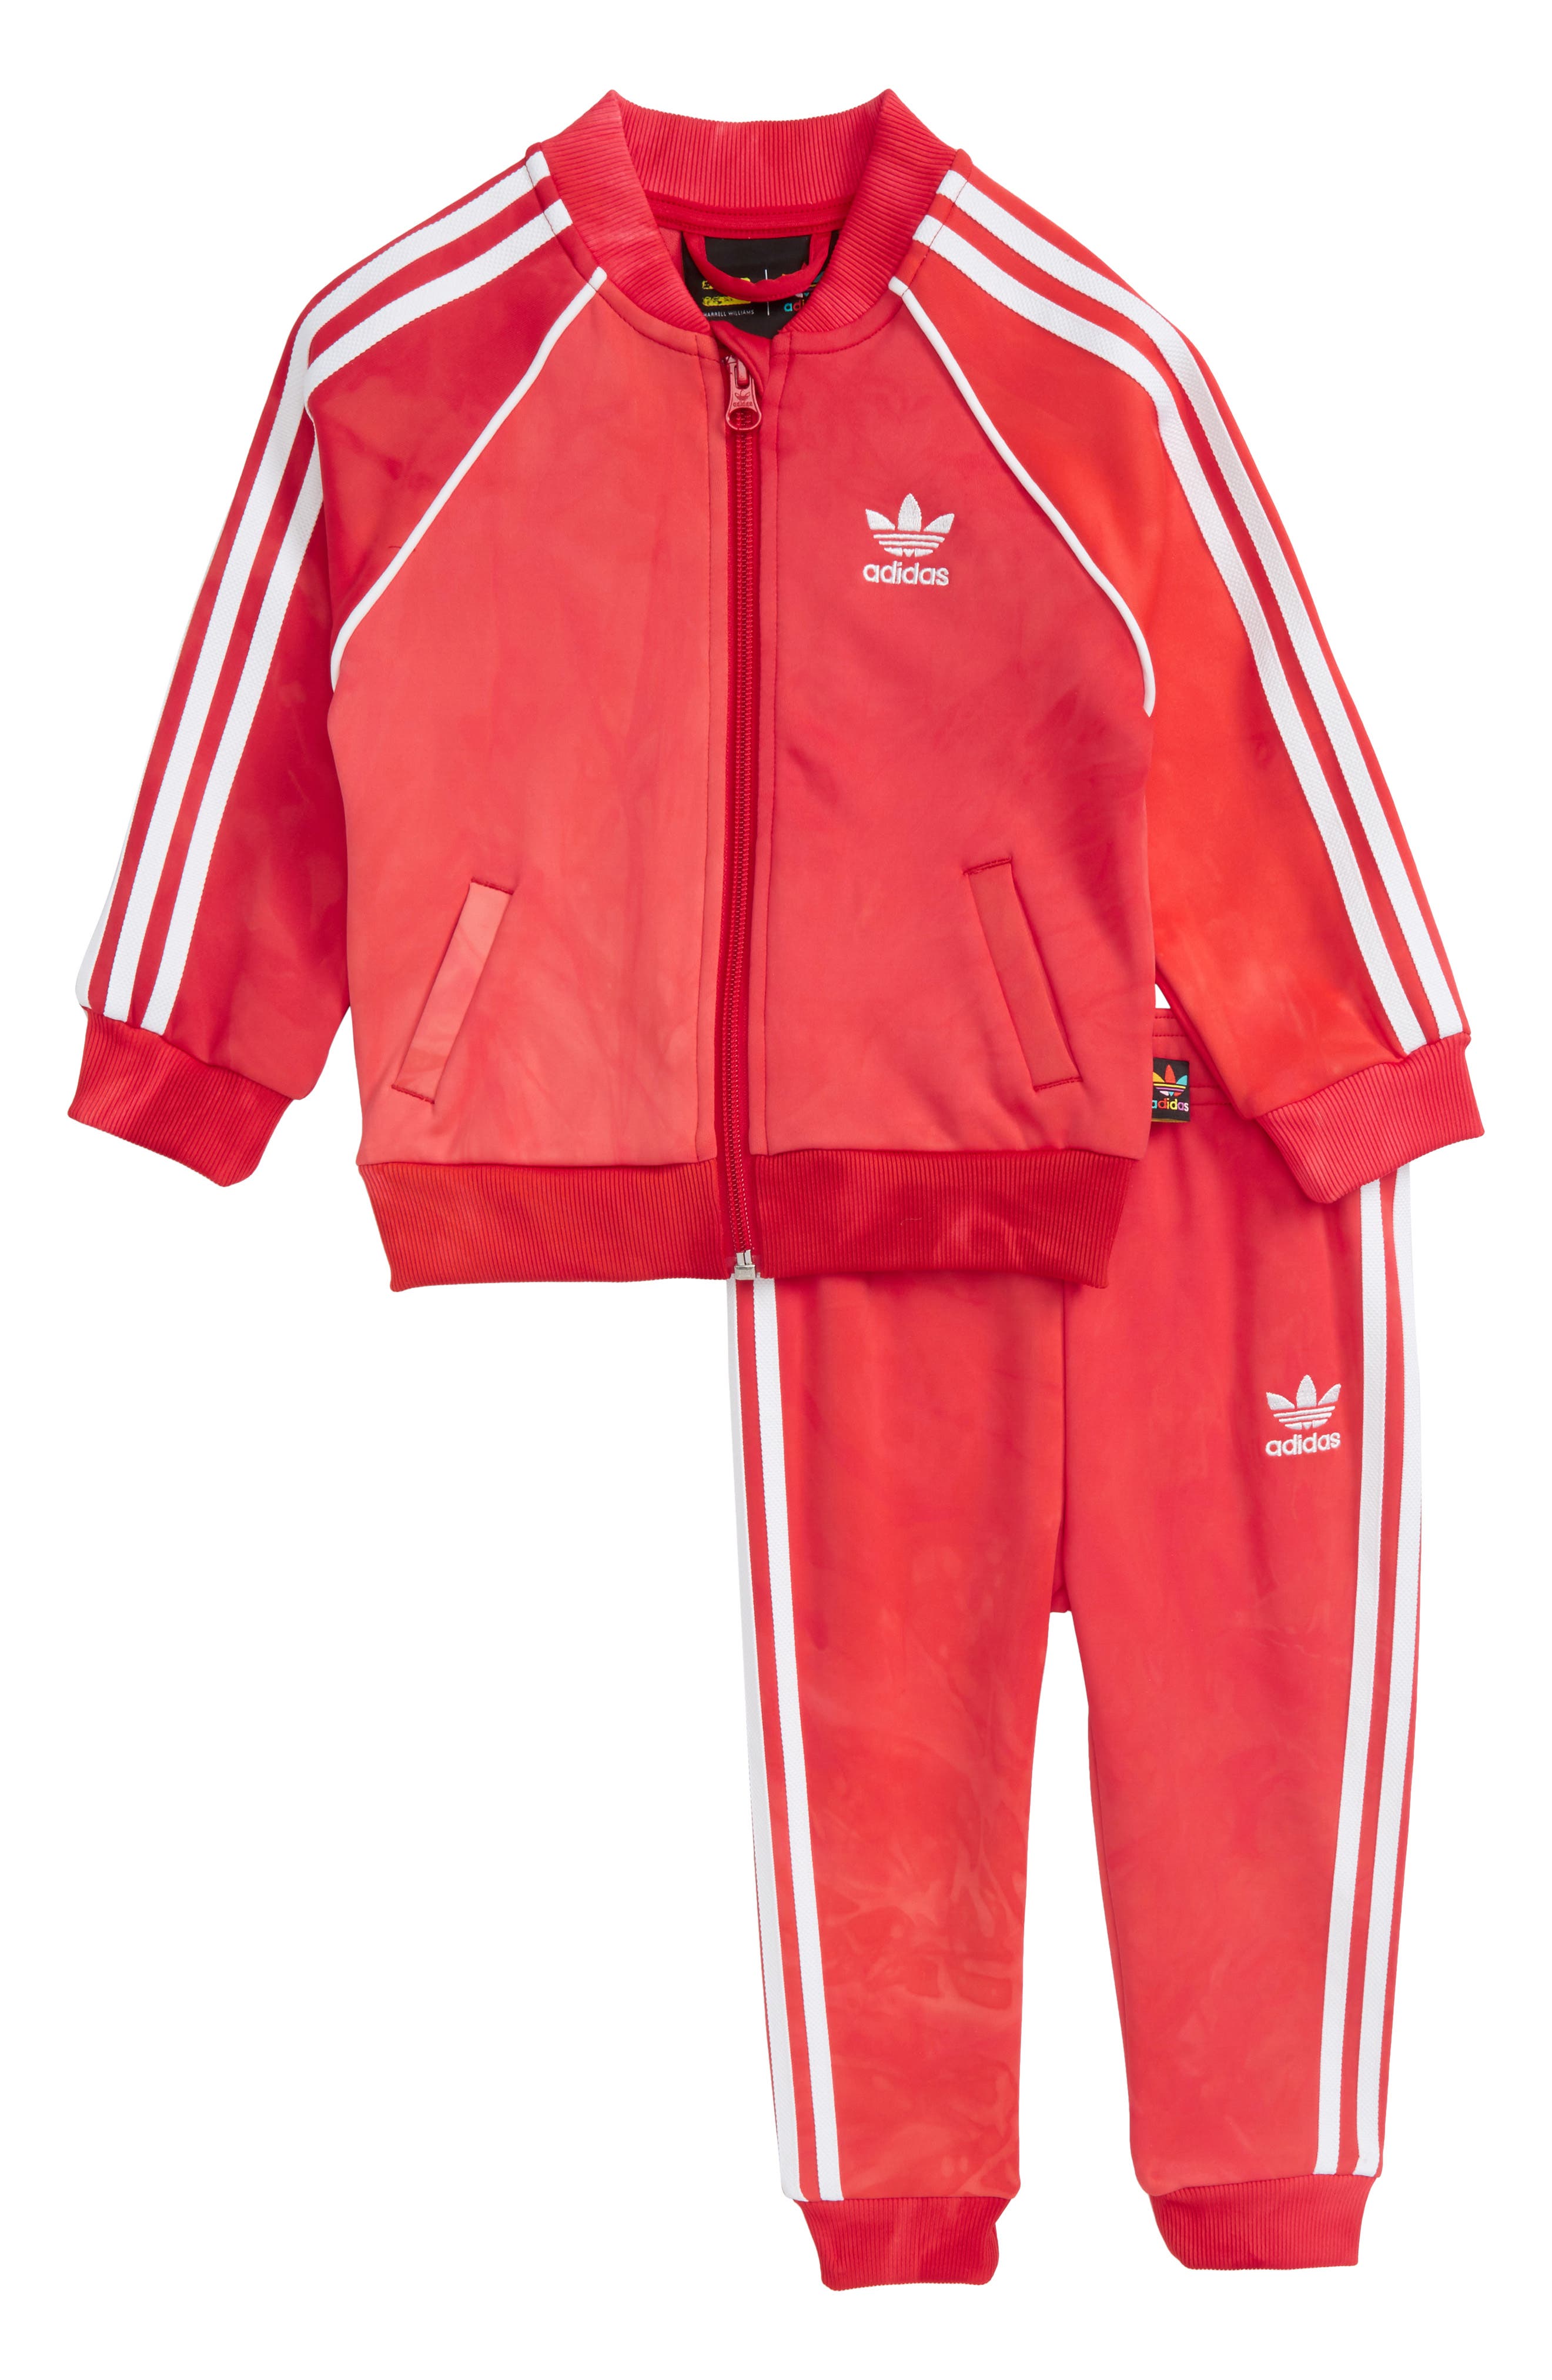 nordstrom adidas tracksuit